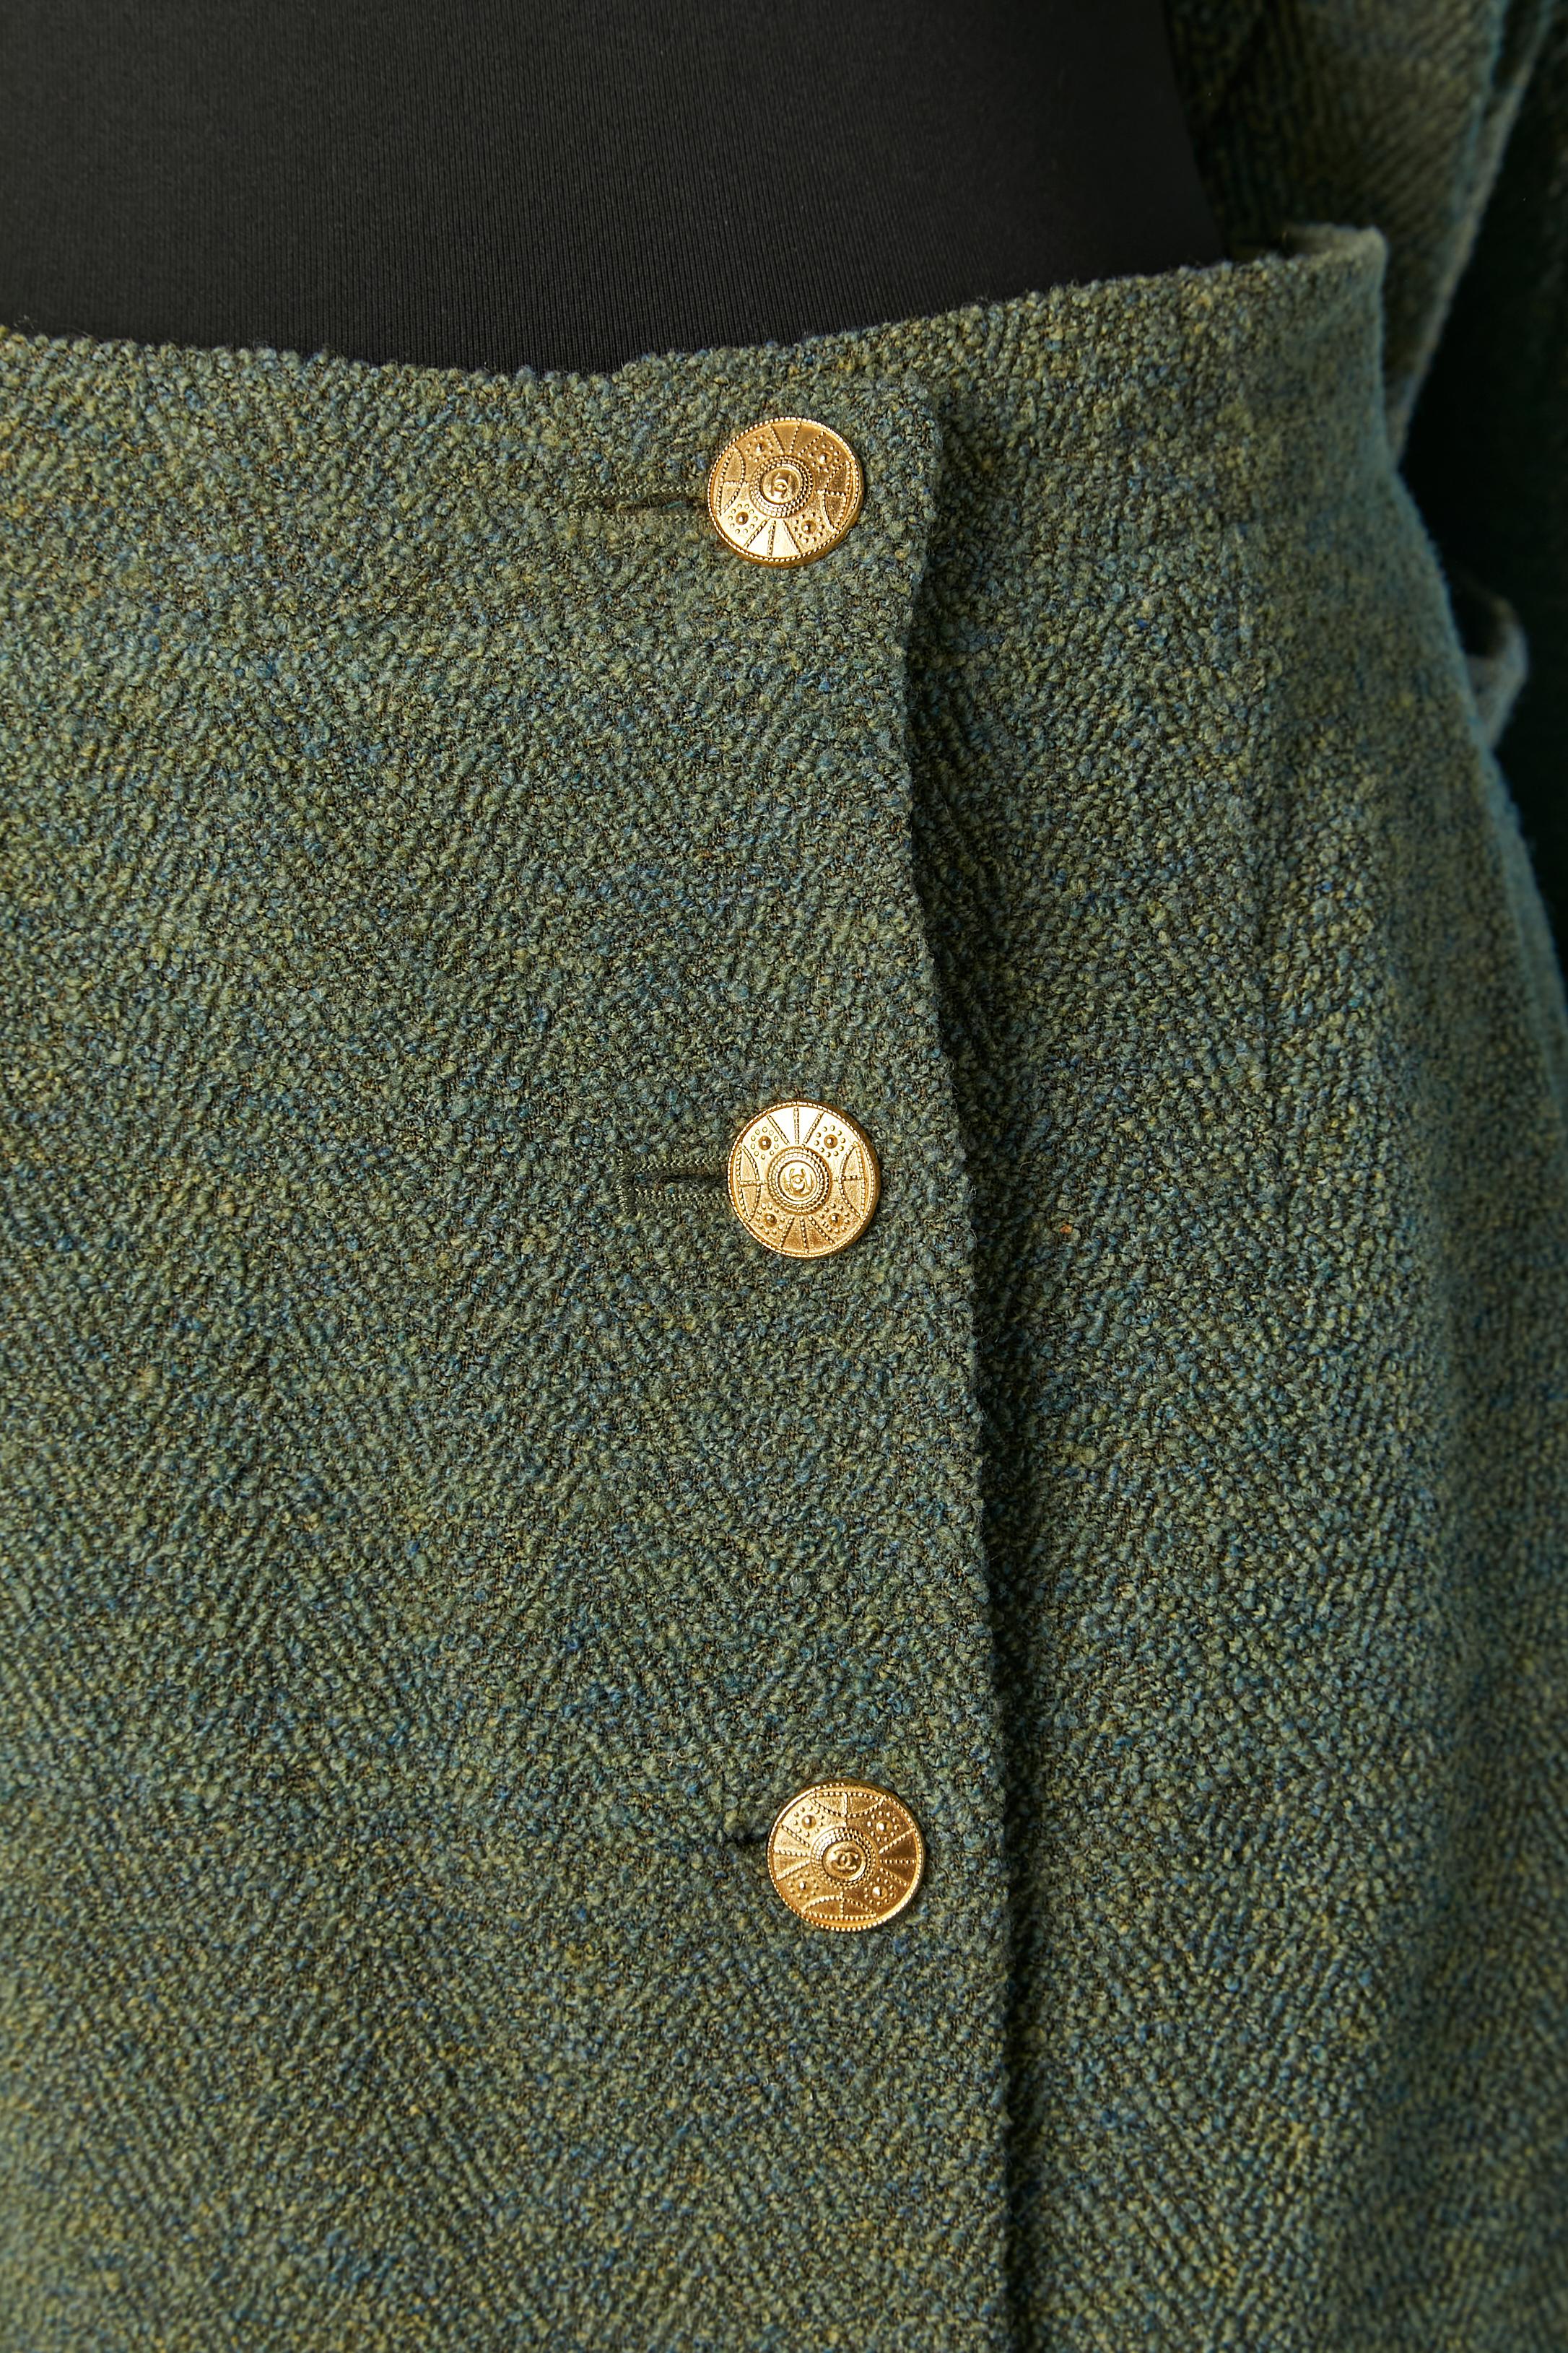 Green wool tweed skirt suit with gold buttons and fur pompoms Chanel Boutique  For Sale 4